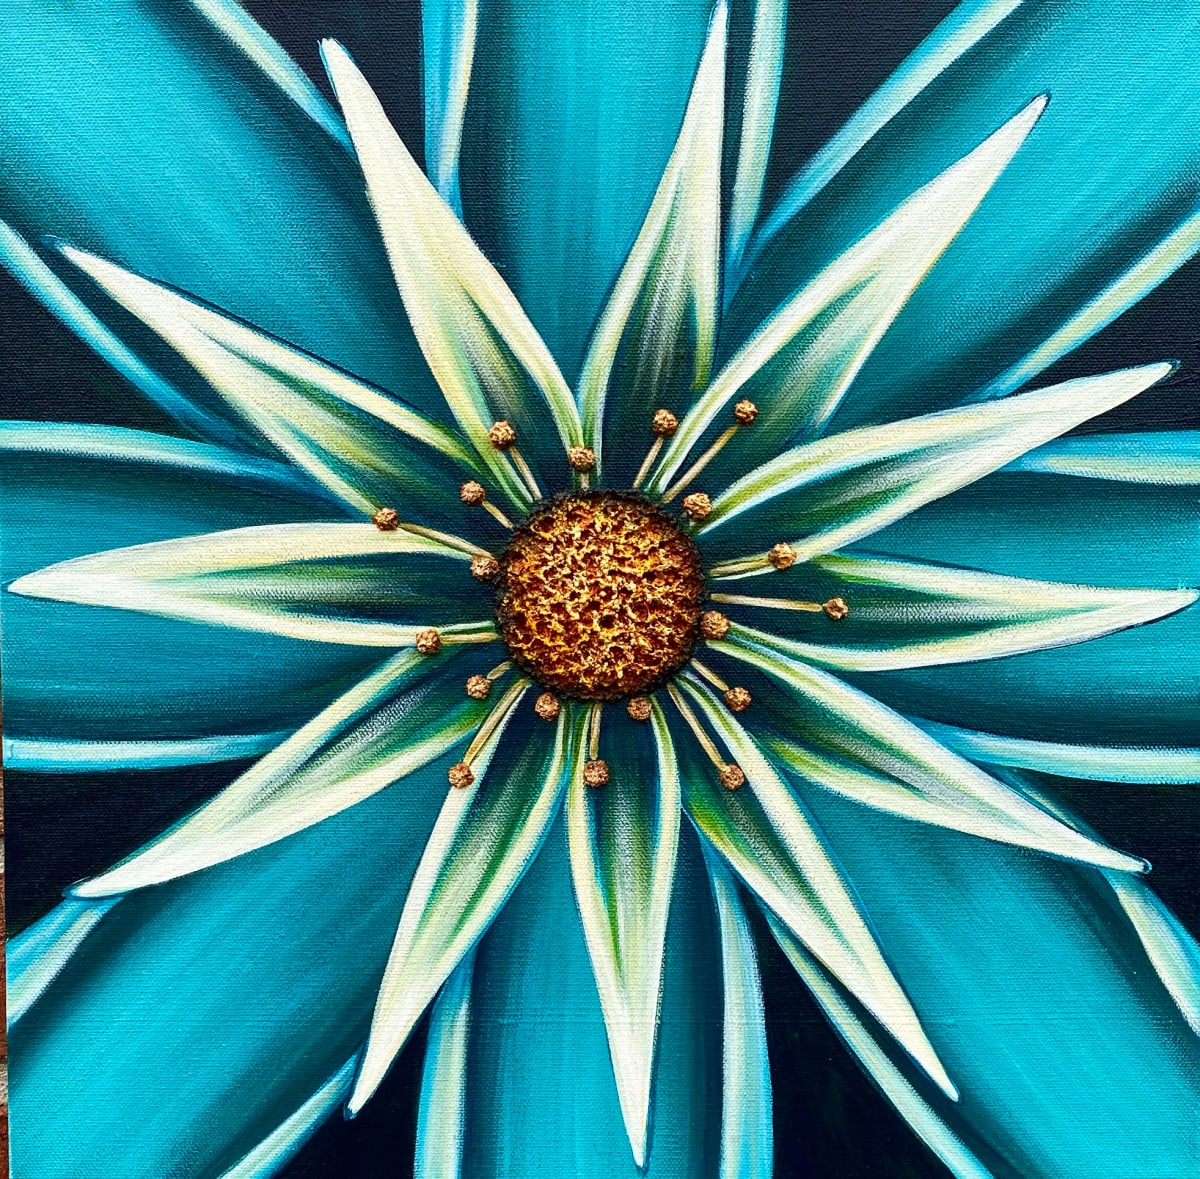 Totally Teal #1231 by Denise Cassidy Wood 